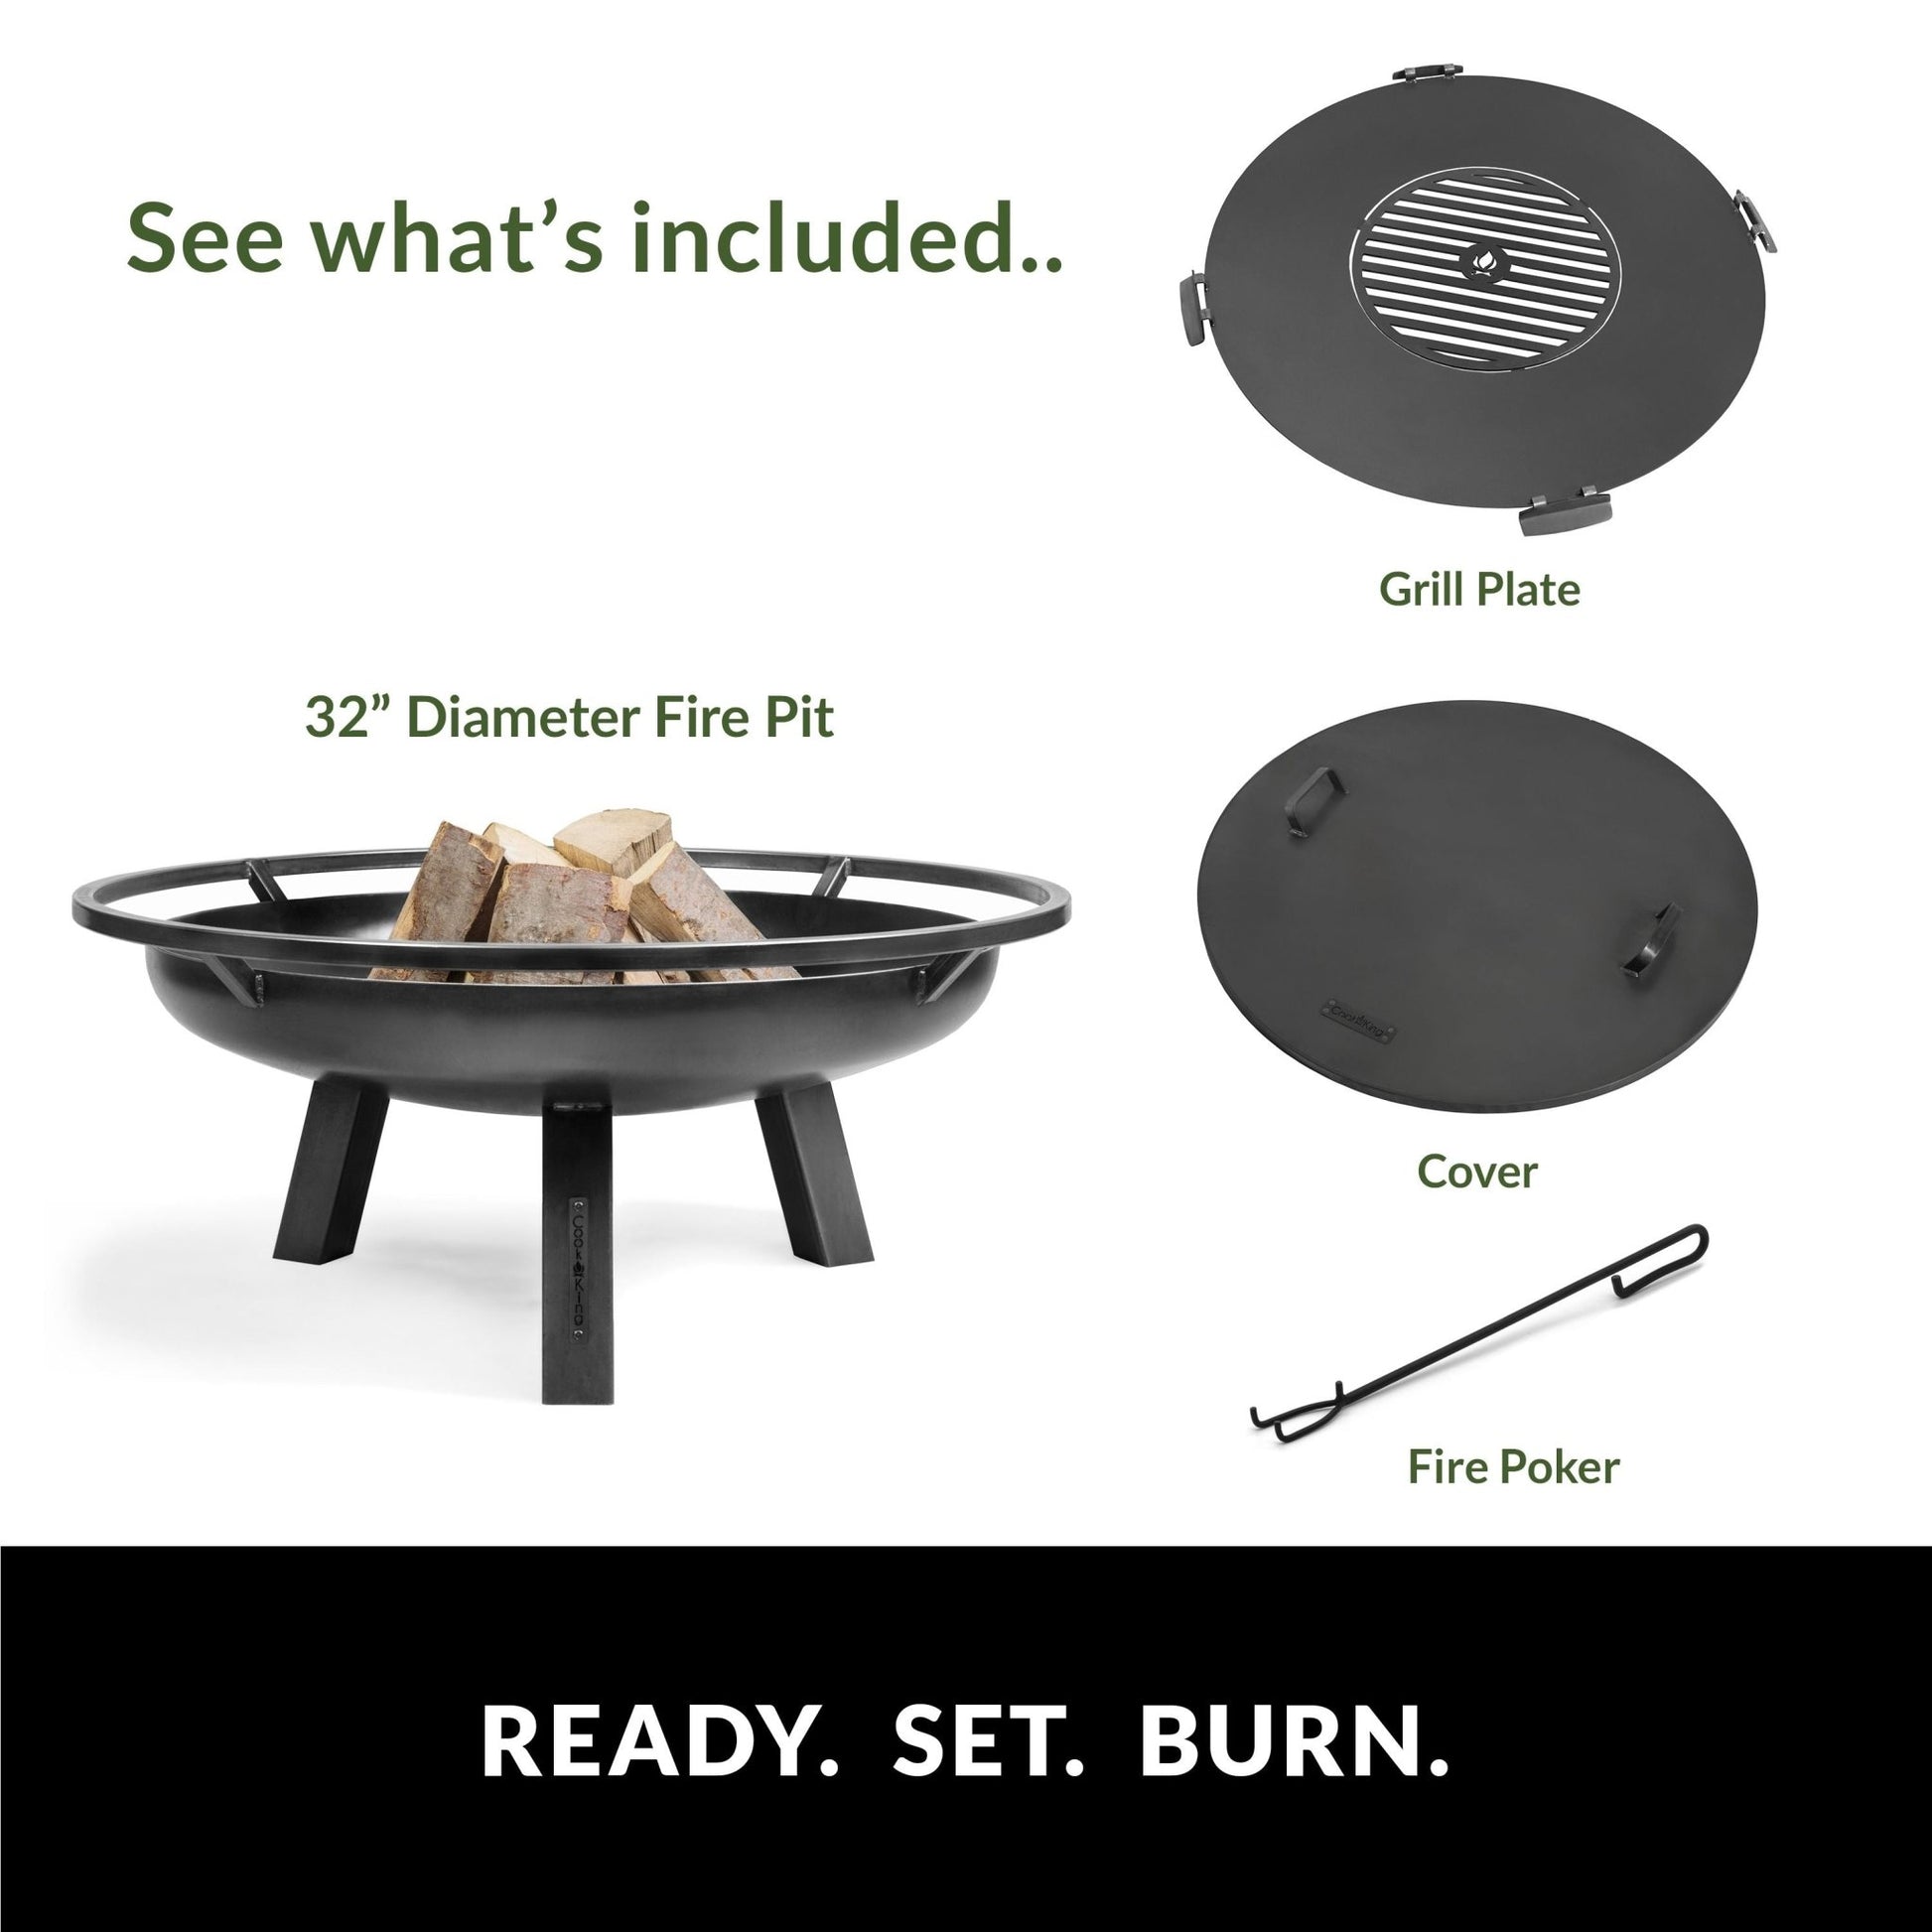 Ember 32" Fire Pit with Grill Plate and Cover Lid - Good Directions